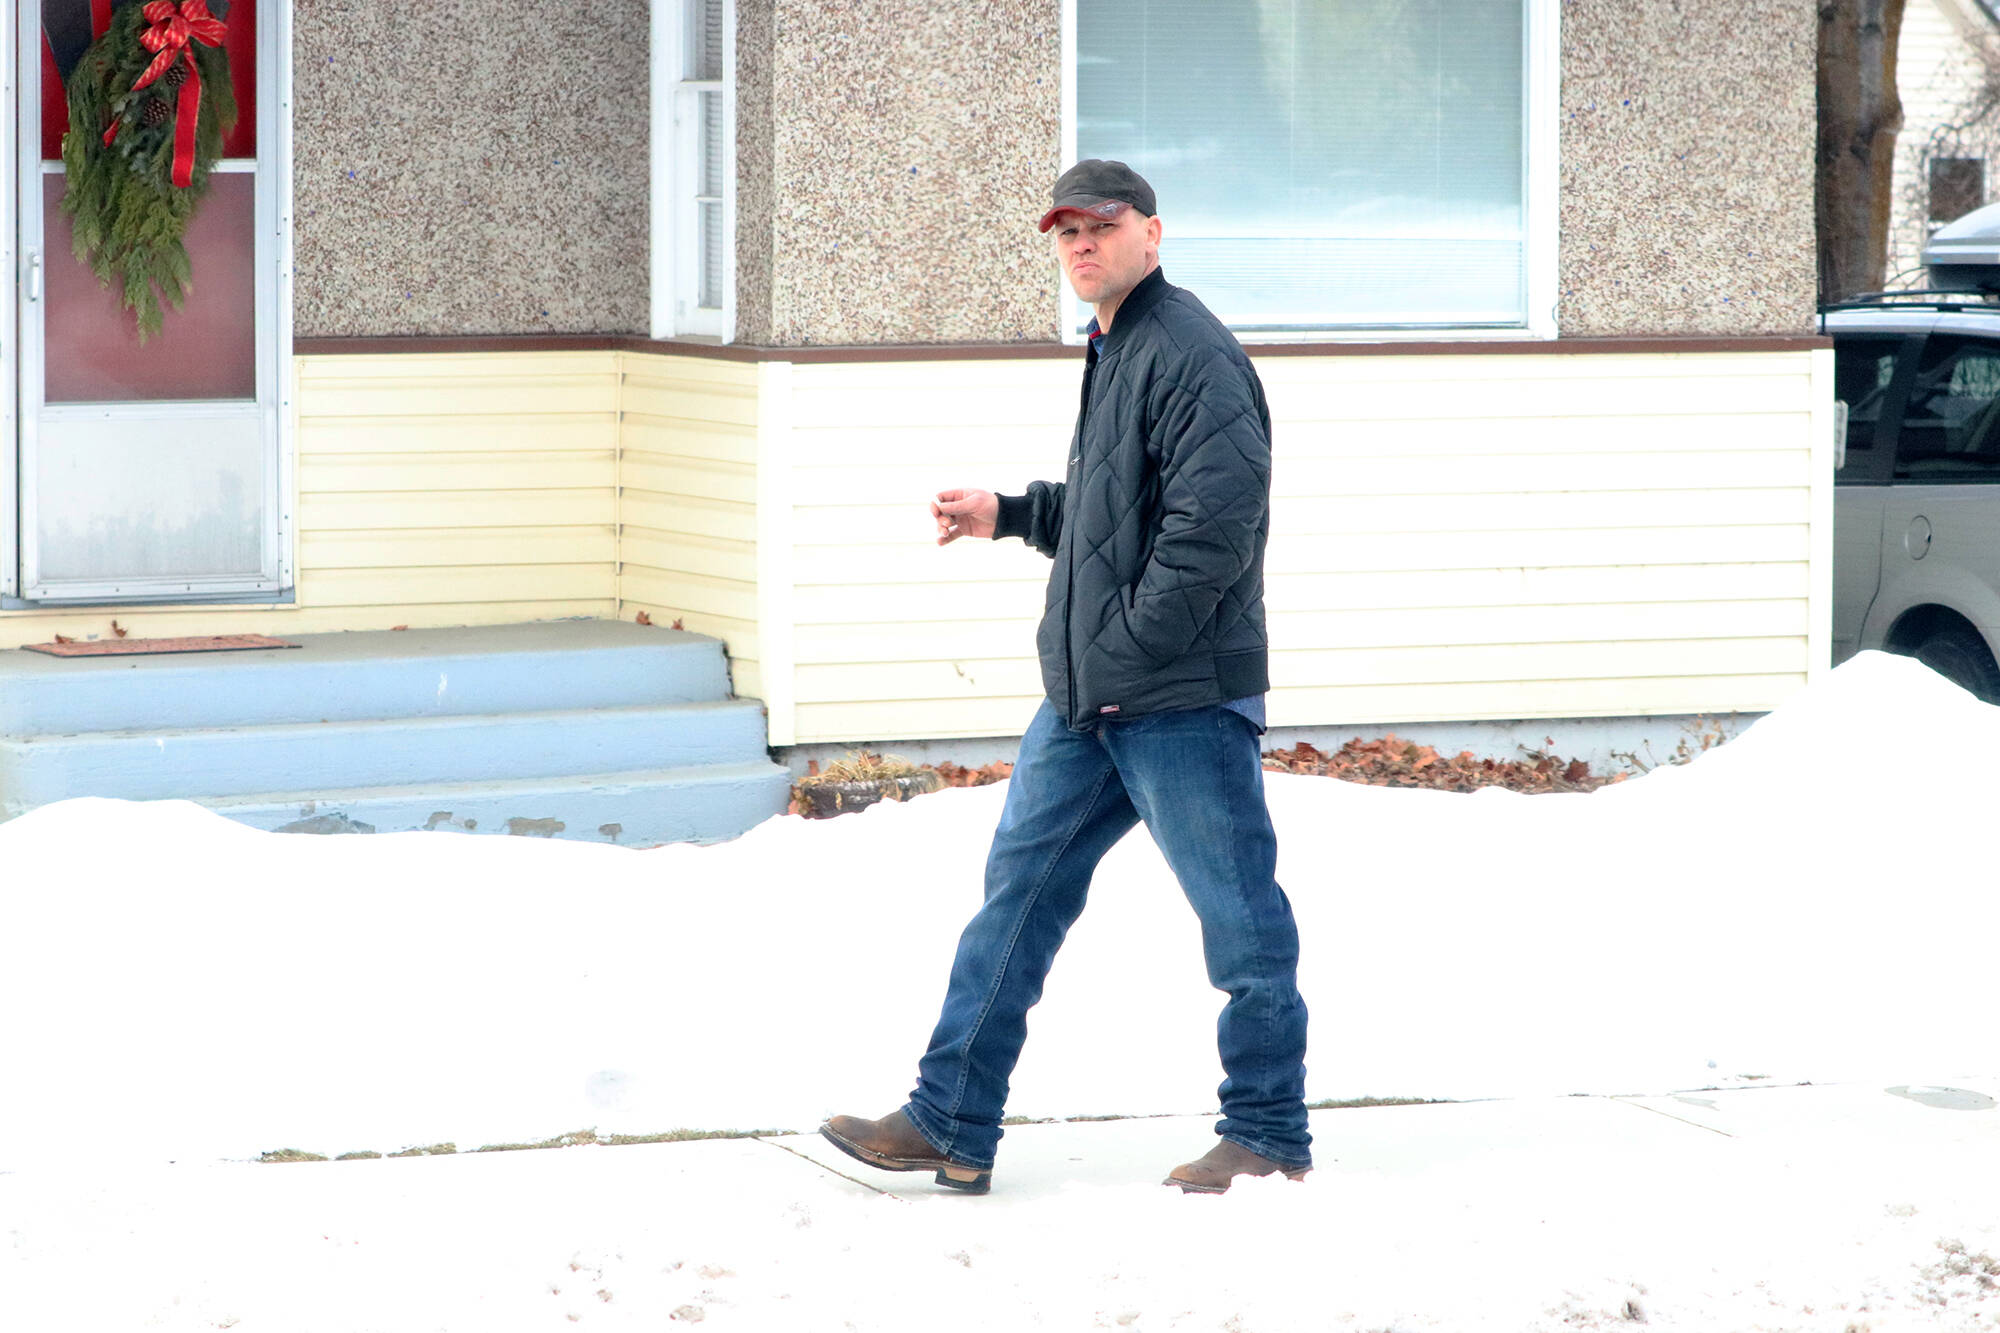 Curtis Sagmoen is before the court again on an 11 count information alleging a variety of breaches of his probation order. He is scheduled to appear in court on Feb. 22, 2023, for a pre-trial conference. (Jennifer Smith - Morning Star)